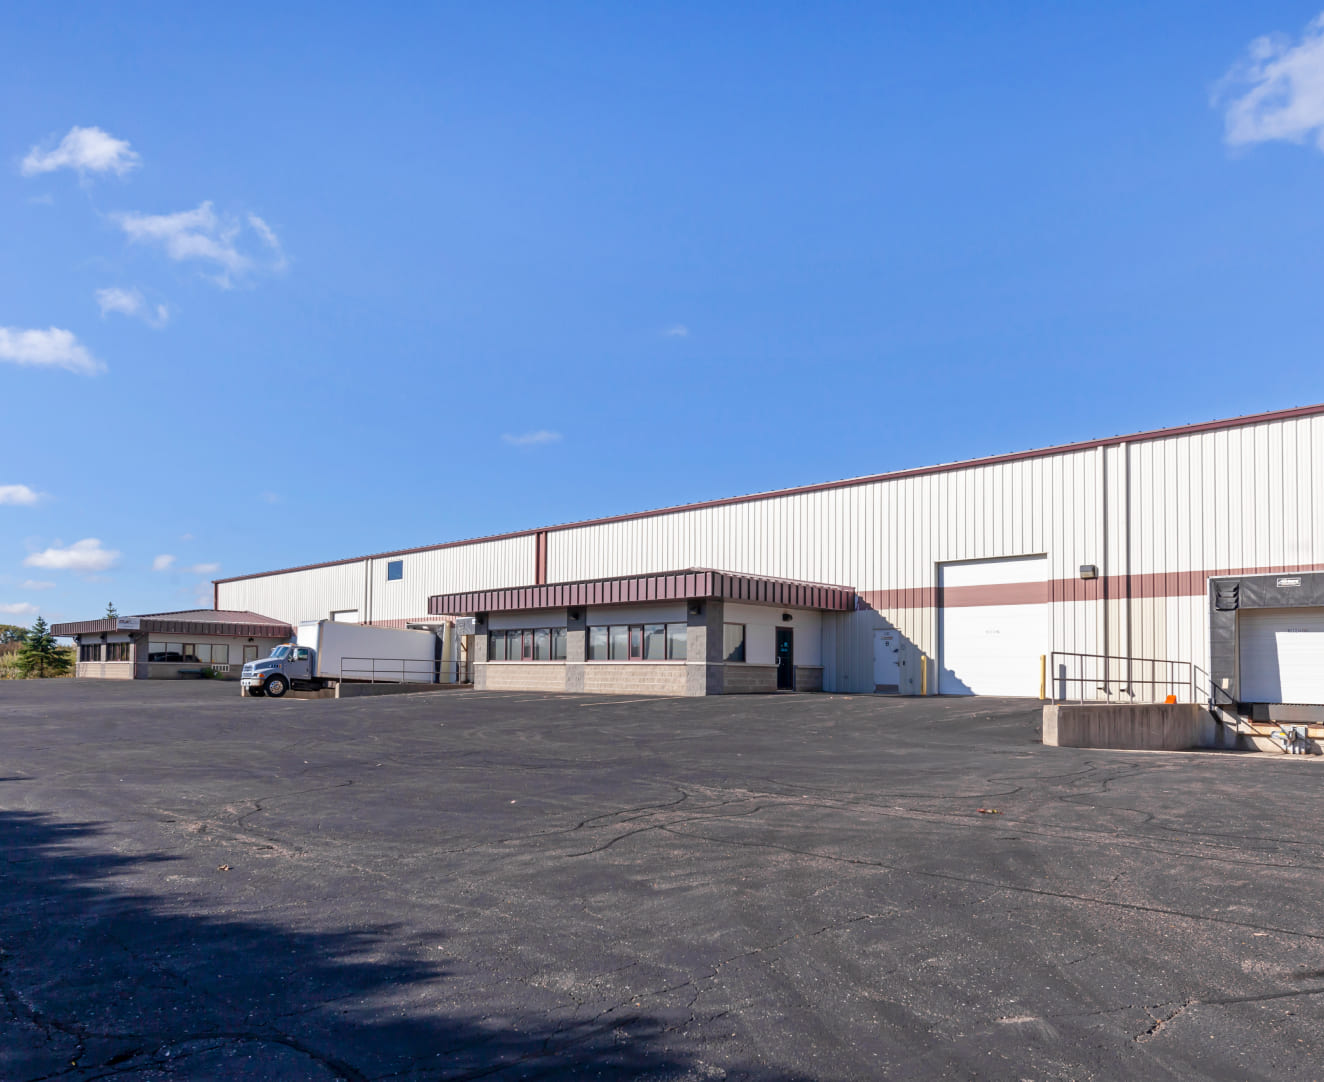 The back lot and loading docks of 8155 Forsythia Street in Middletown, WI.